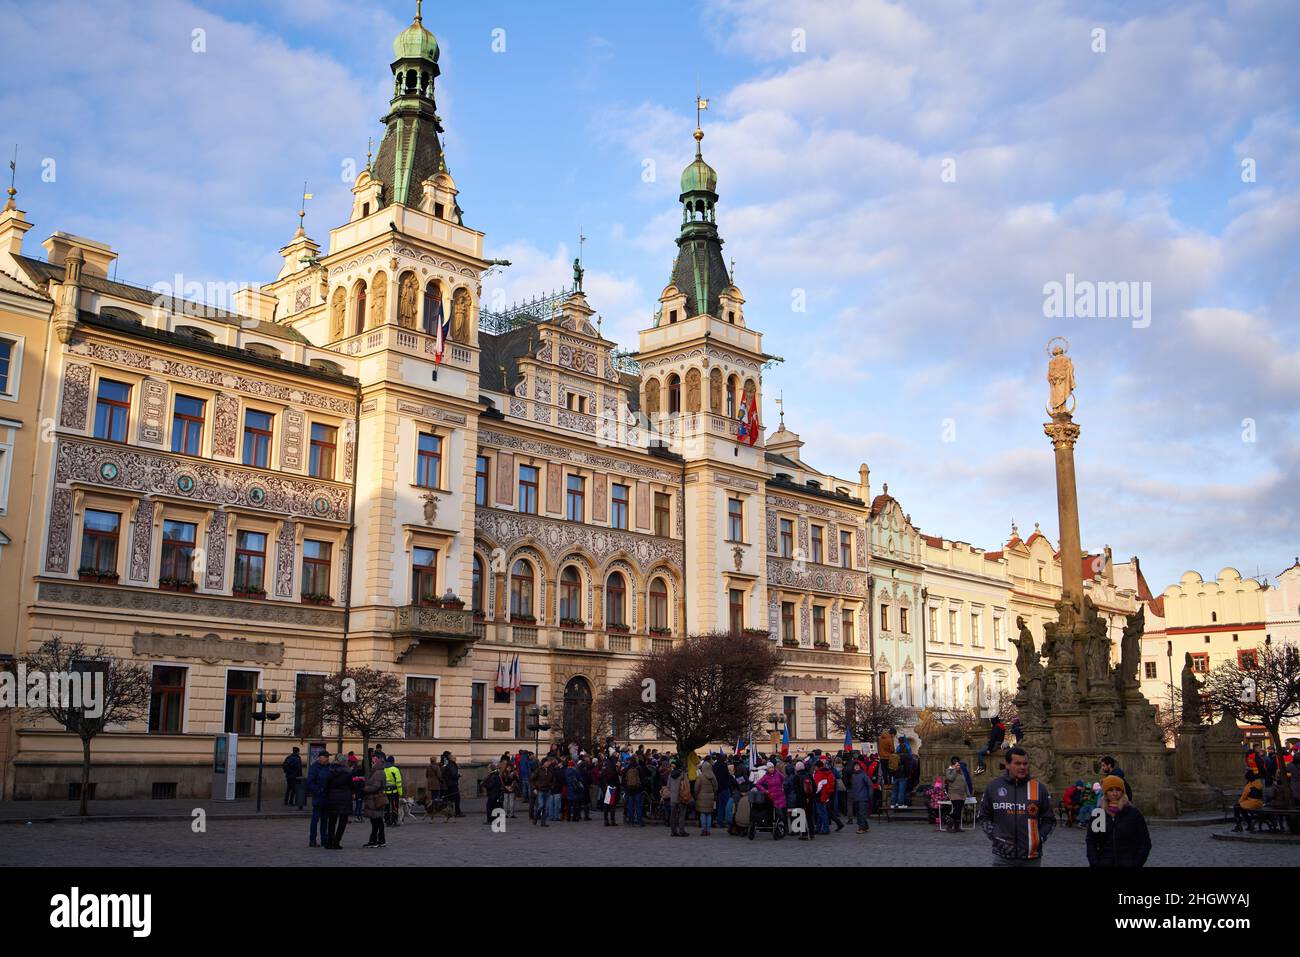 PARDUBICE, CZECH REPUBLIC - jANUARY 15, 2022: Town hall and people at an anti-vaccine demonstration during coronavirus pandemic Stock Photo